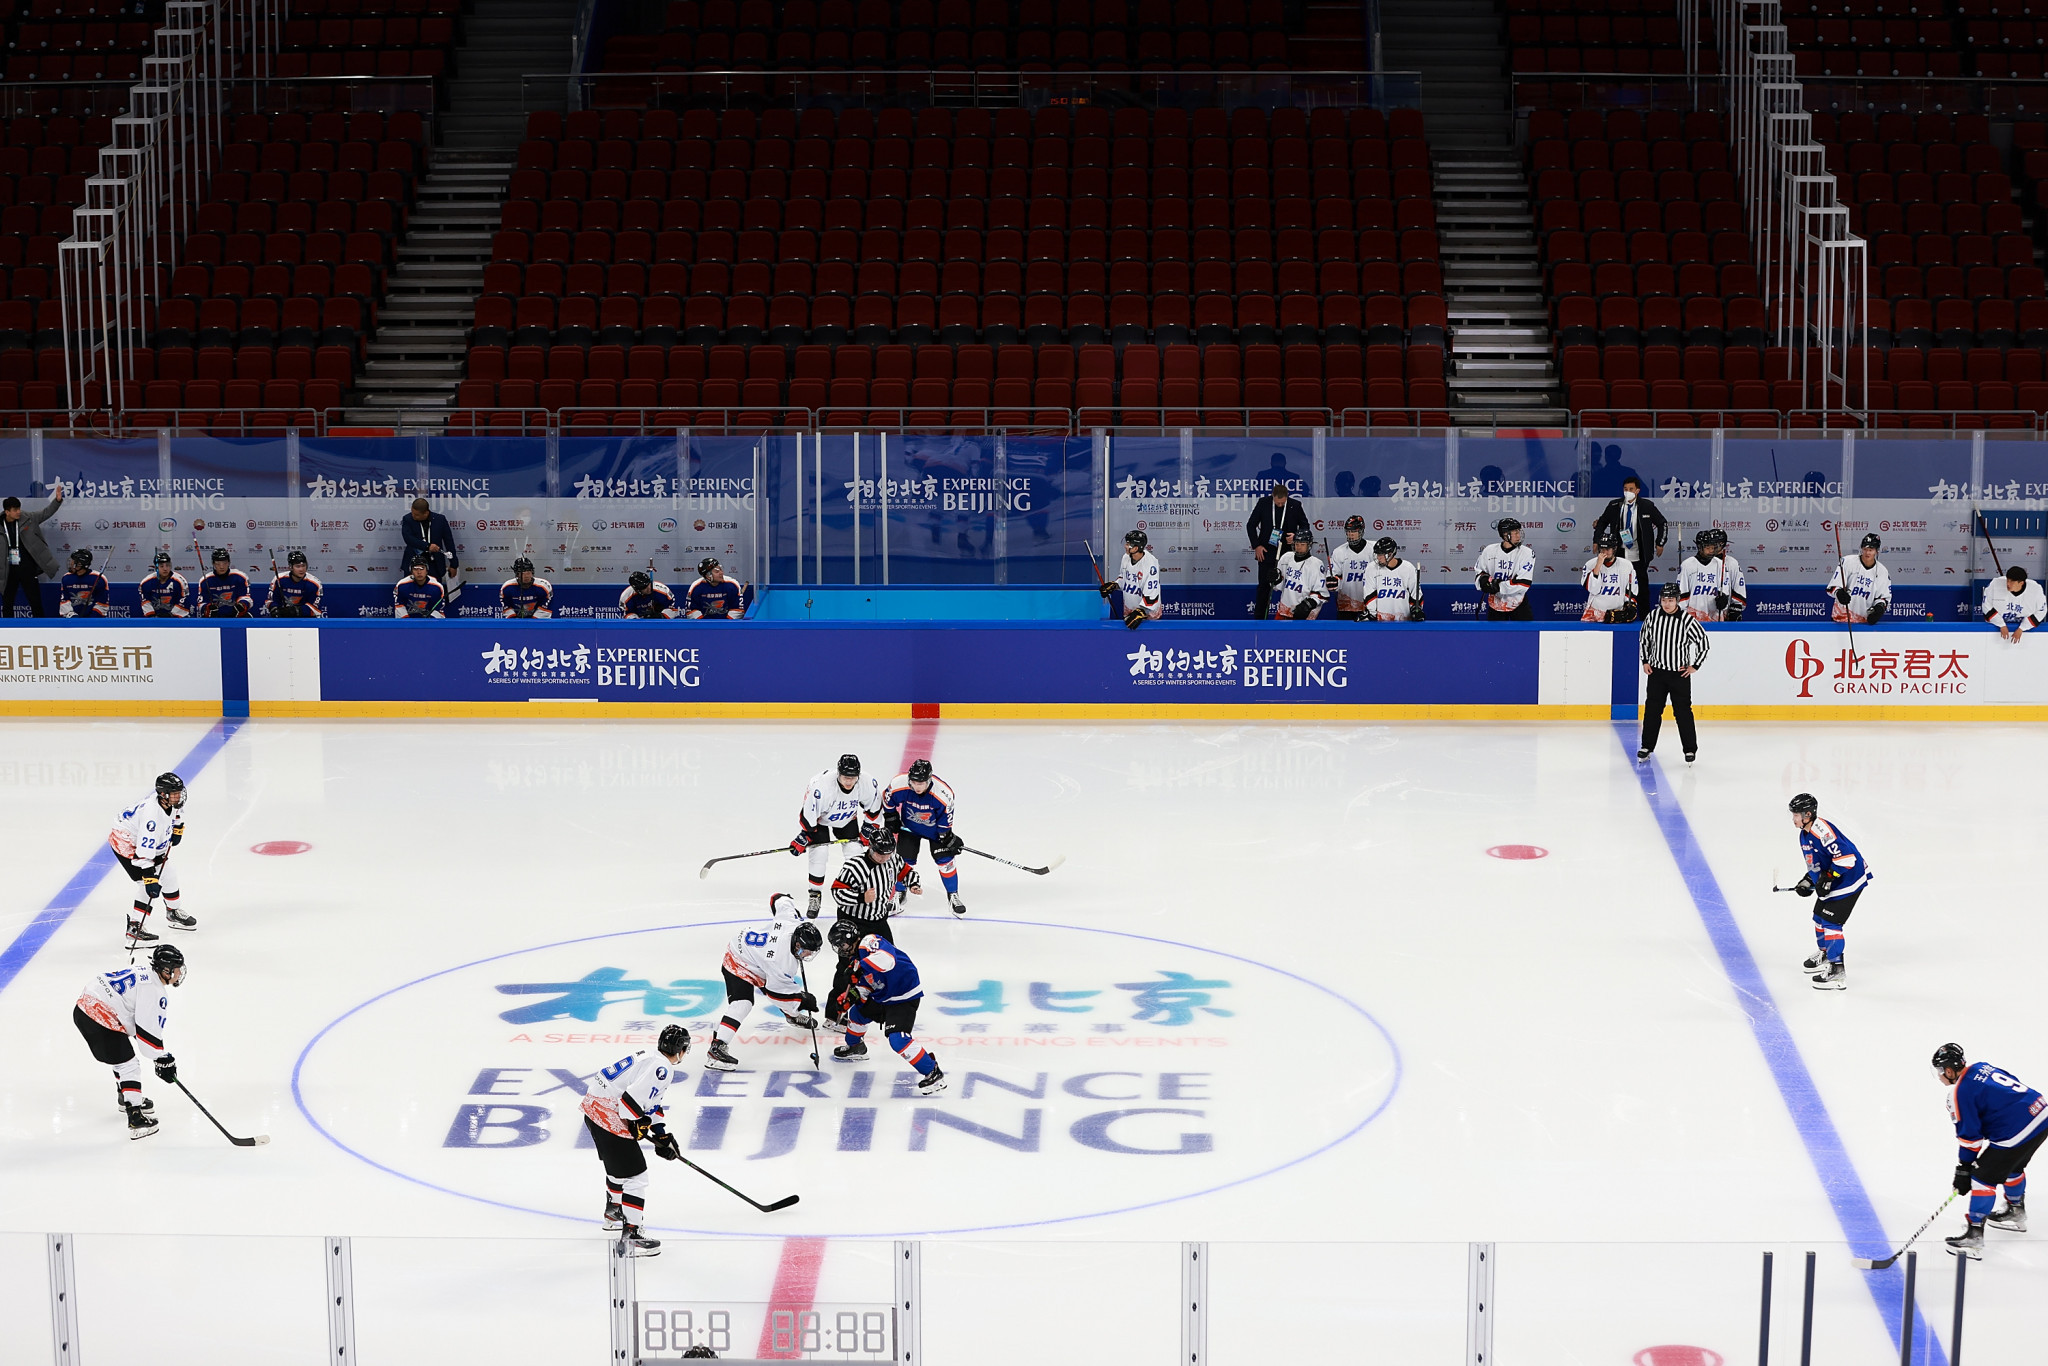 Wukesong Arena has been hosting a test event for Beijing 2022 featuring local ice hockey teams ©Getty Images